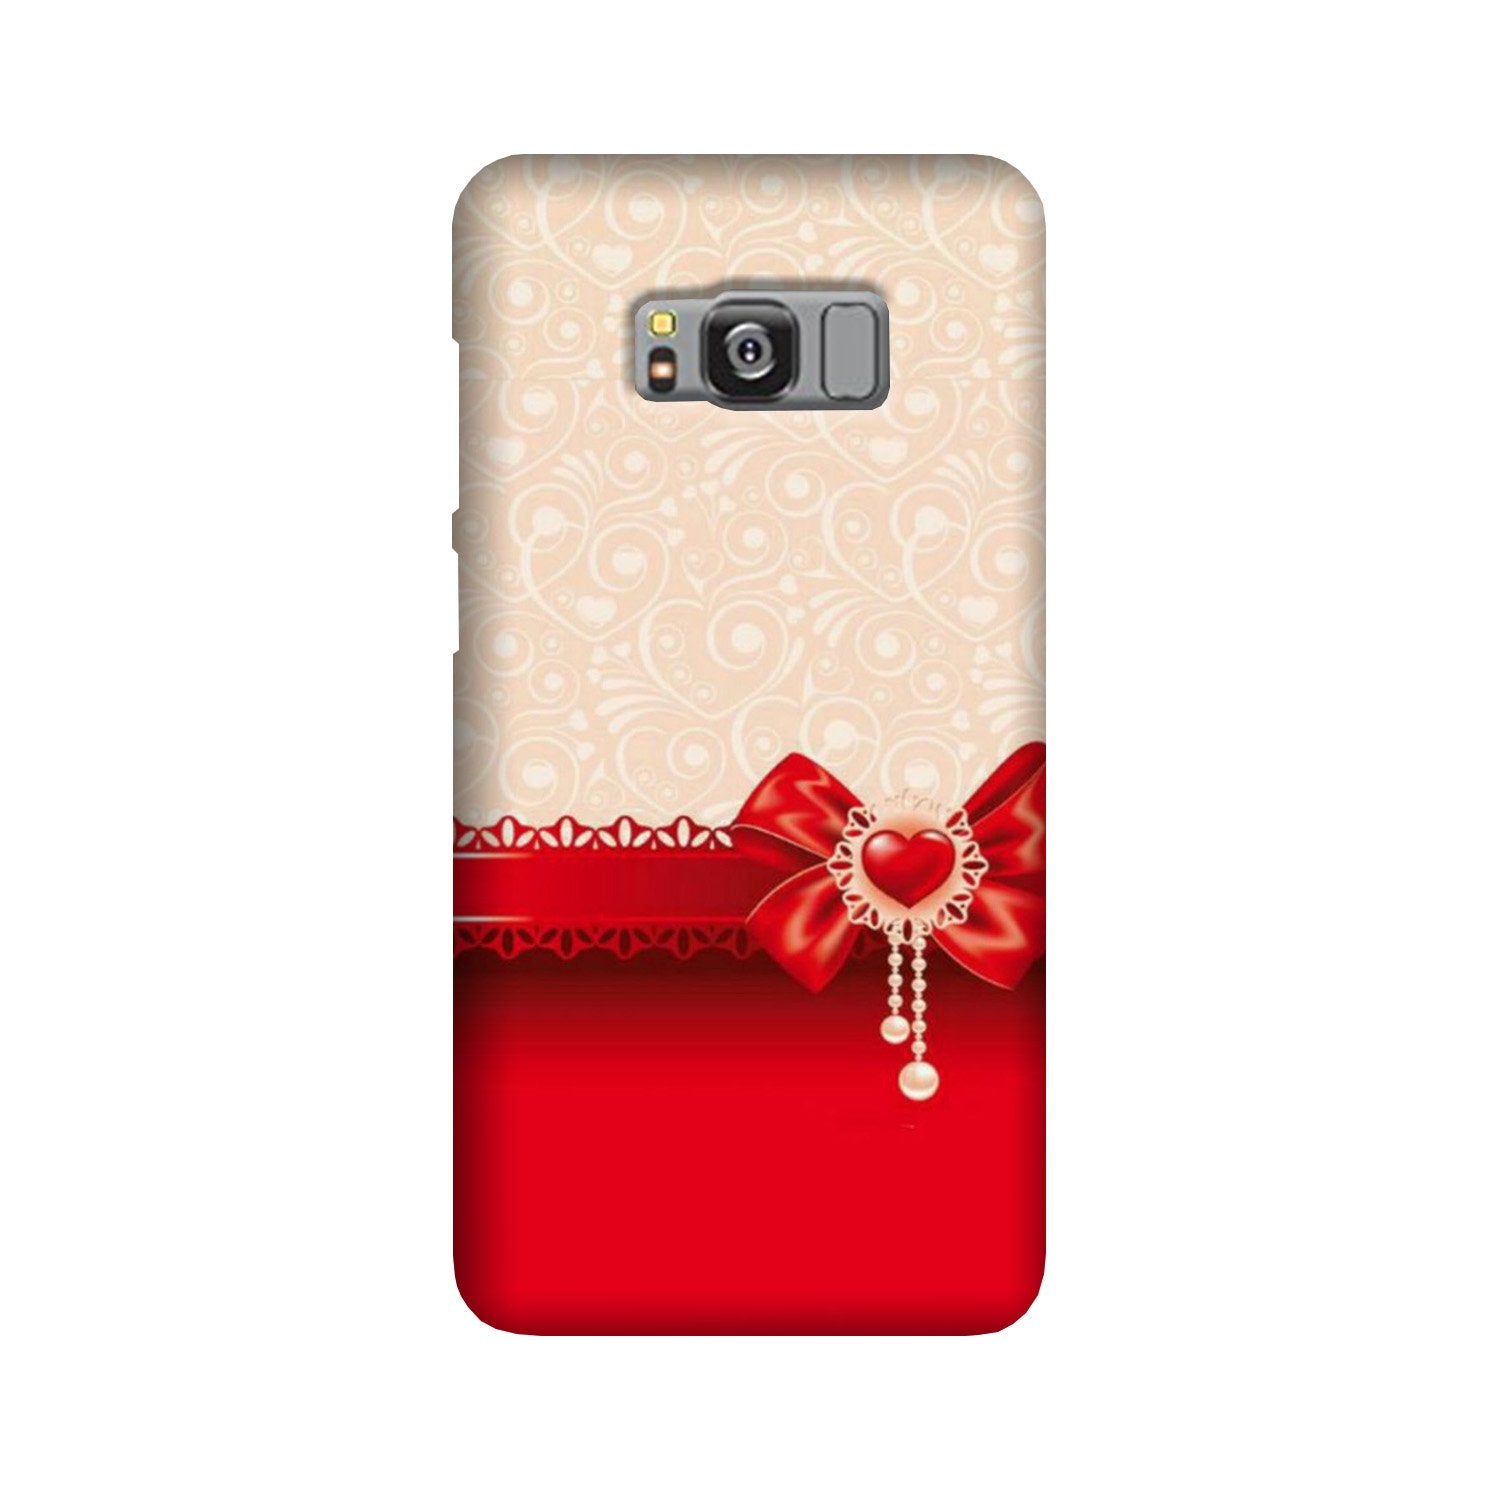 Gift Wrap3 Case for Galaxy S8